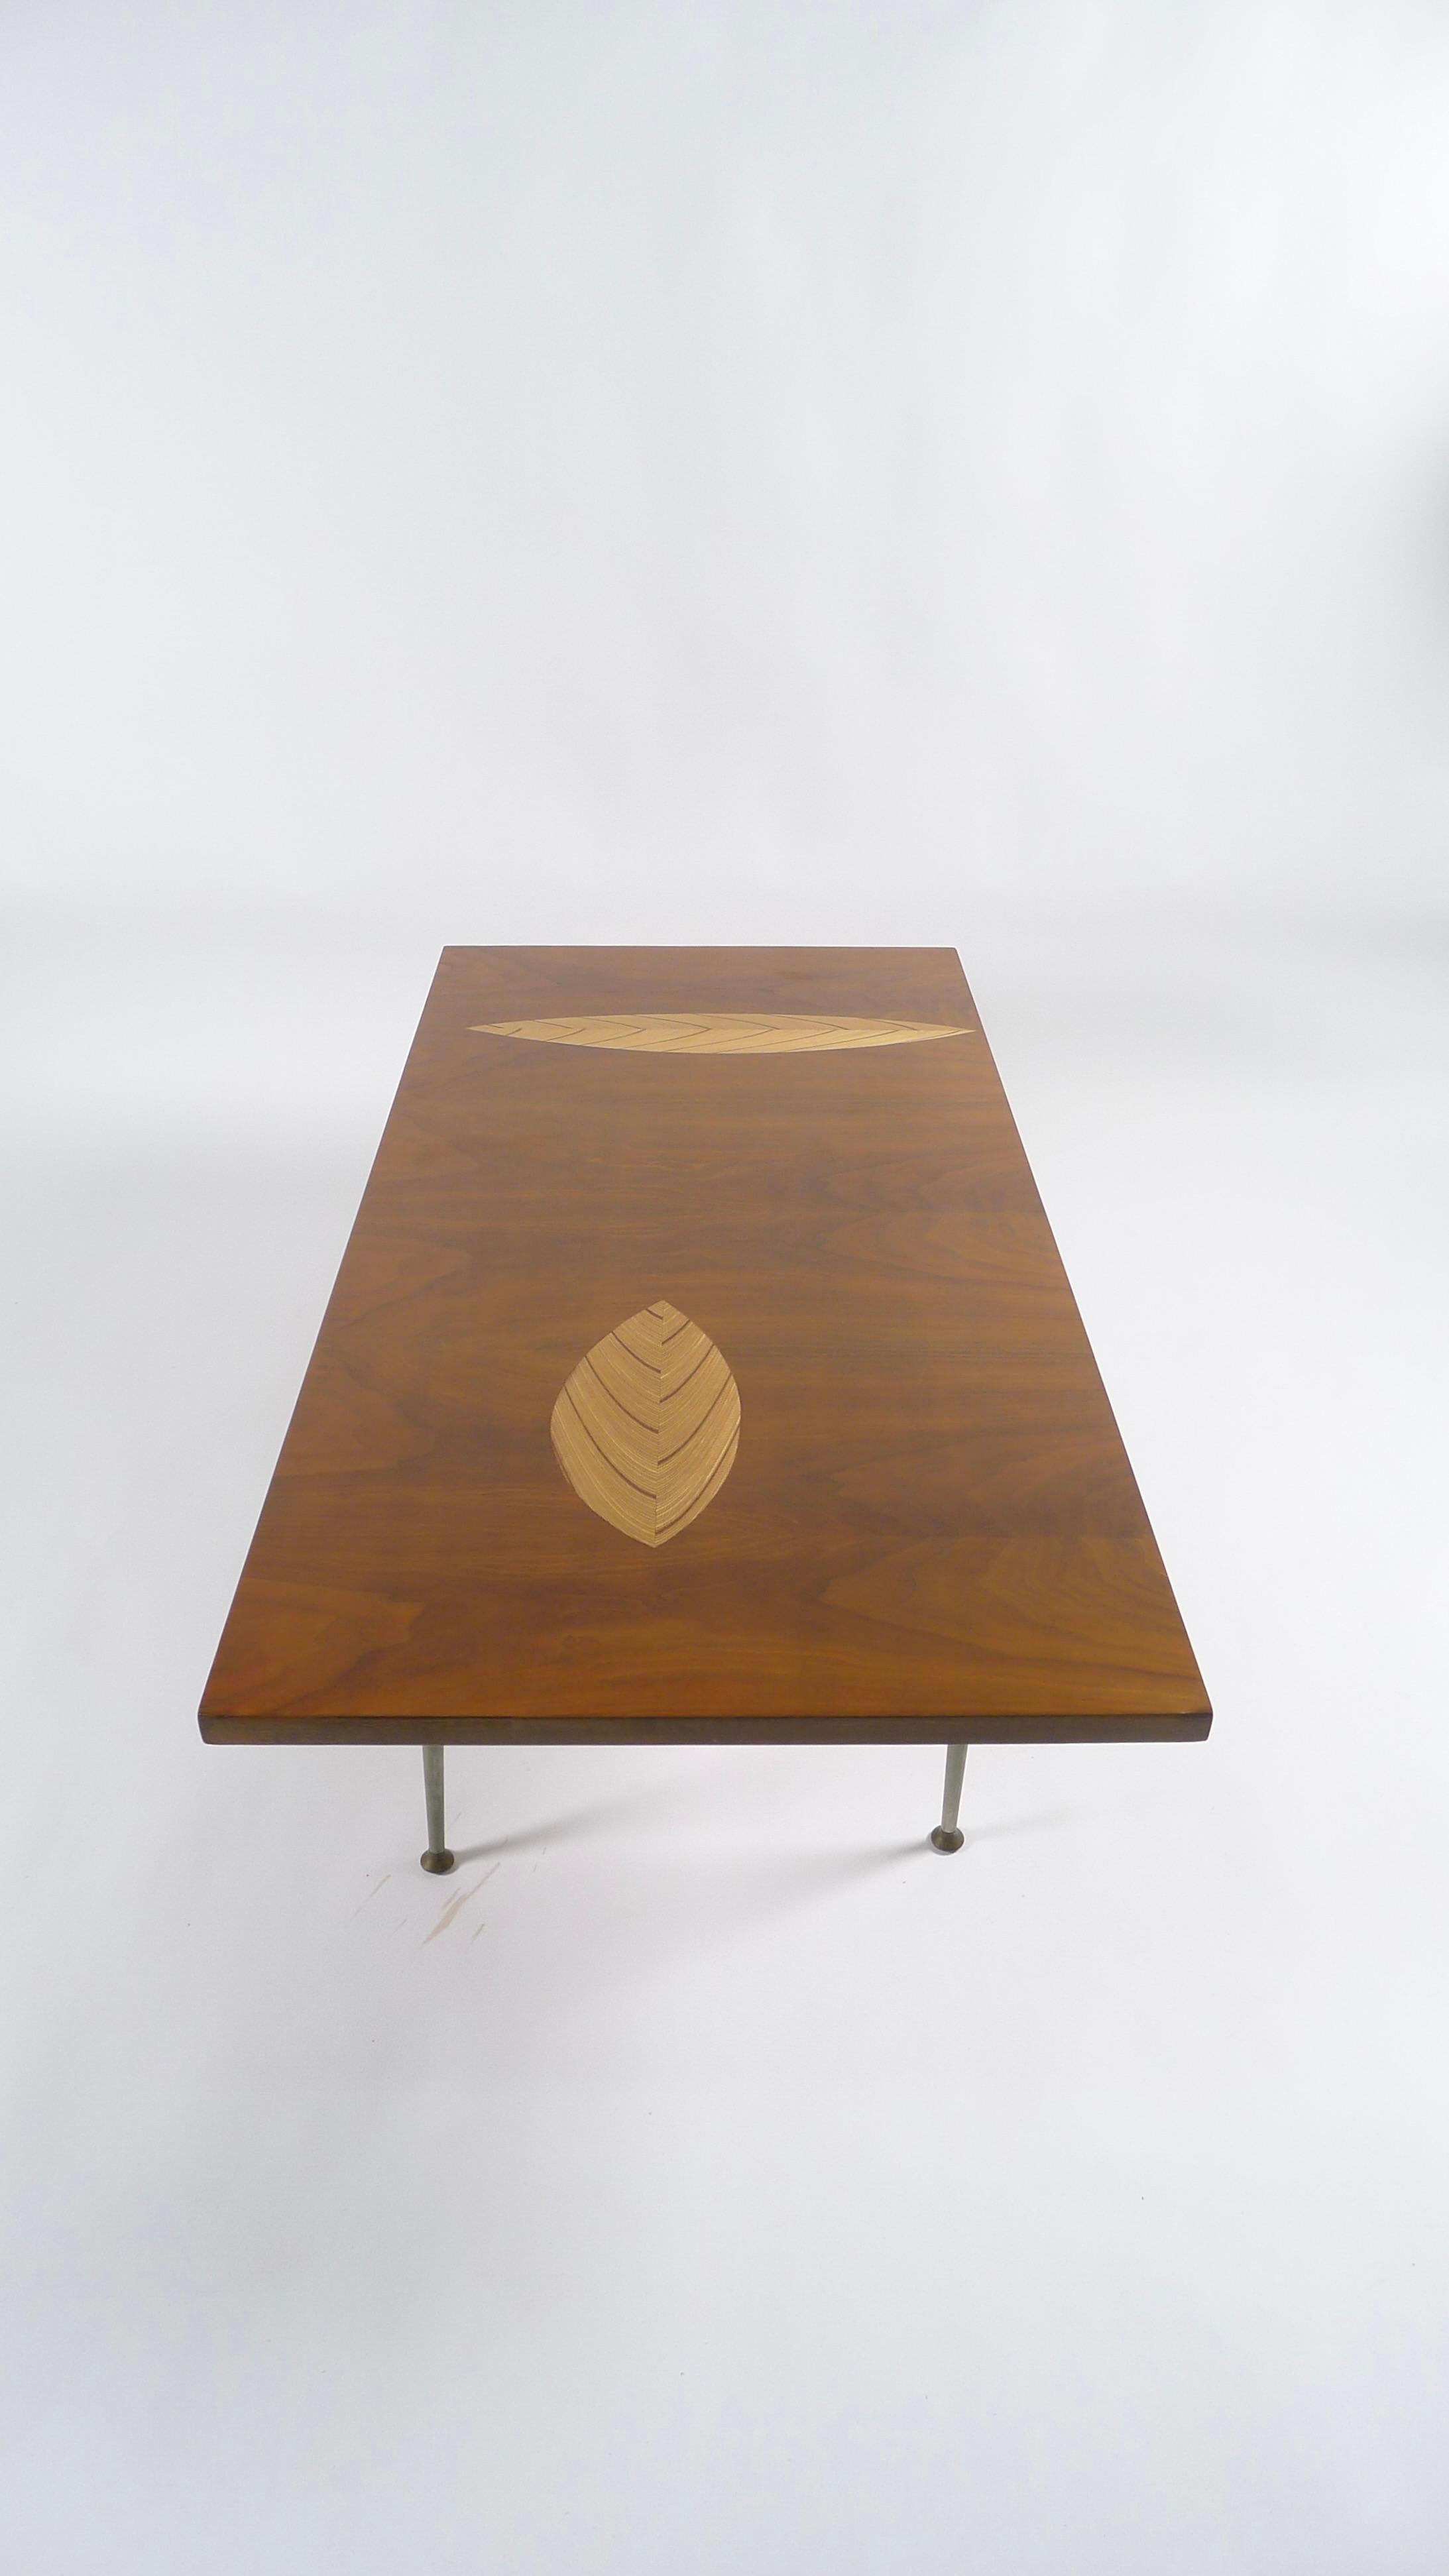 Rare leaf inlay coffee table, designed by Tapio Wirkkala and manufactured by Asko, Finland, 1950s, branded

Walnut with birch inlays, on adjustable nickel finished metal legs with brass pad feet

Measures: 120cm wide, 60cm deep, 40cm high.